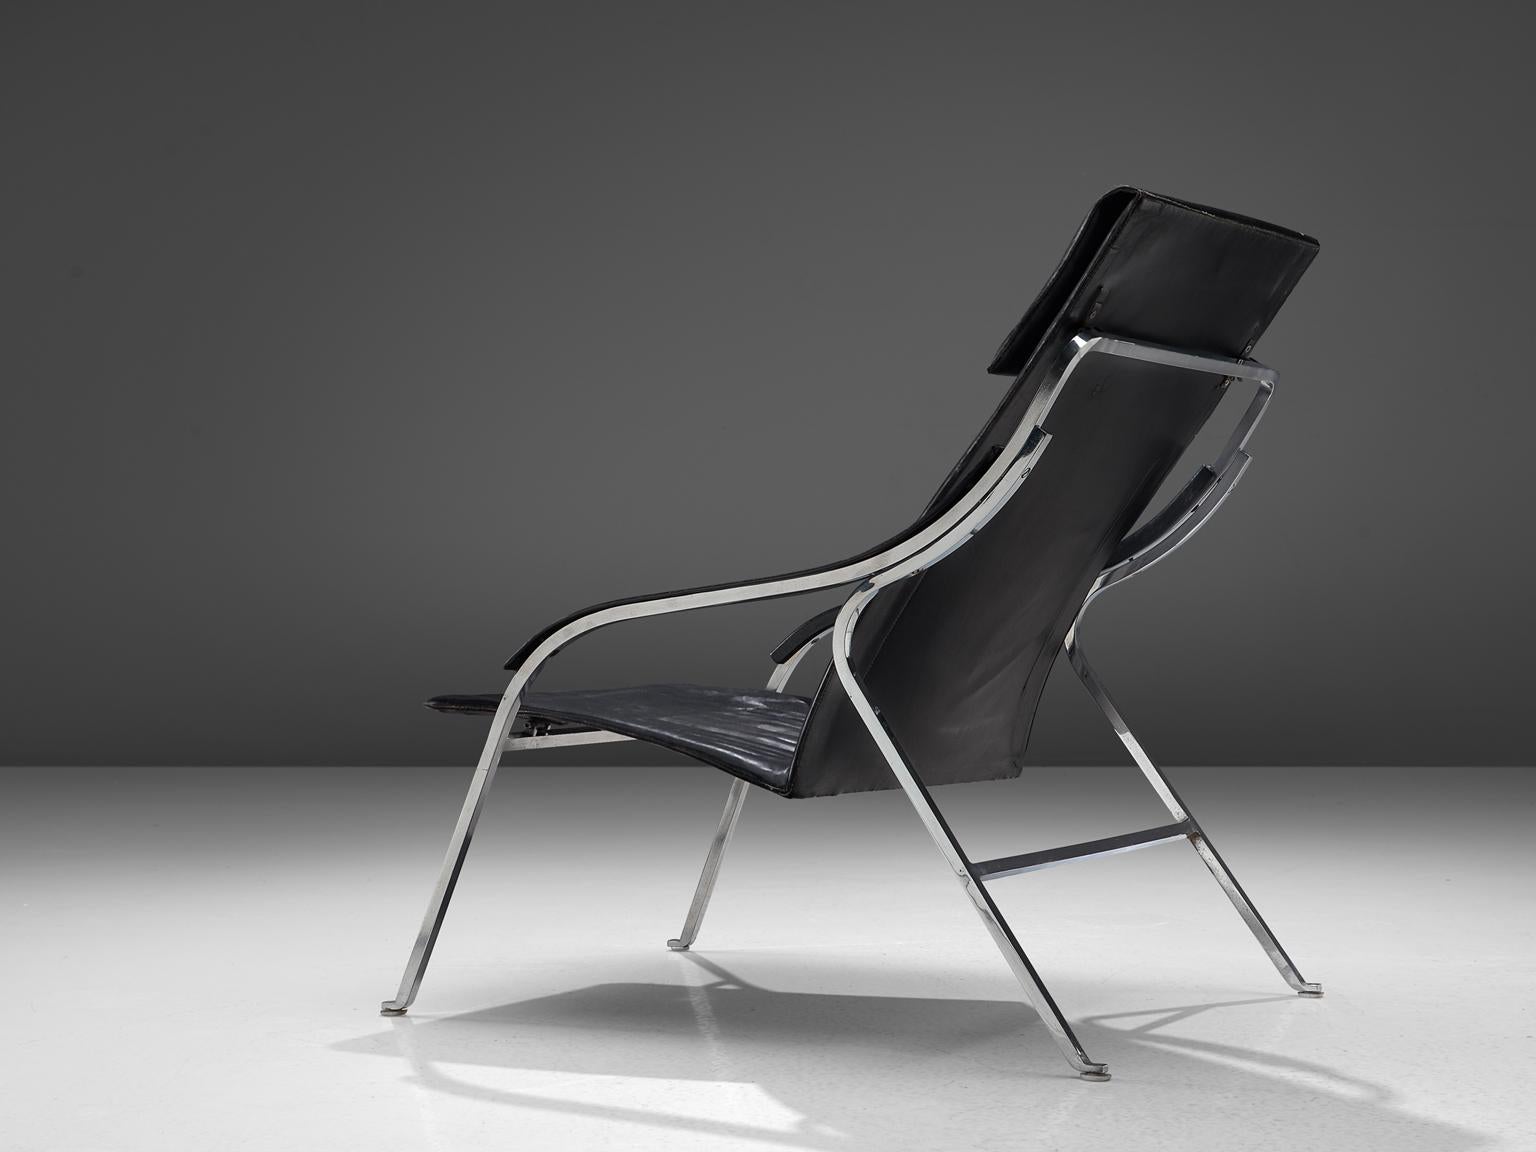 Marco Zanuso for Arflex, fourline lounge chair, black leather and steel, Italy, 1964.

This lounge chair by Zanuso remains among the best examples of armchairs designed by the architect. It is not only the ingenious slender design that